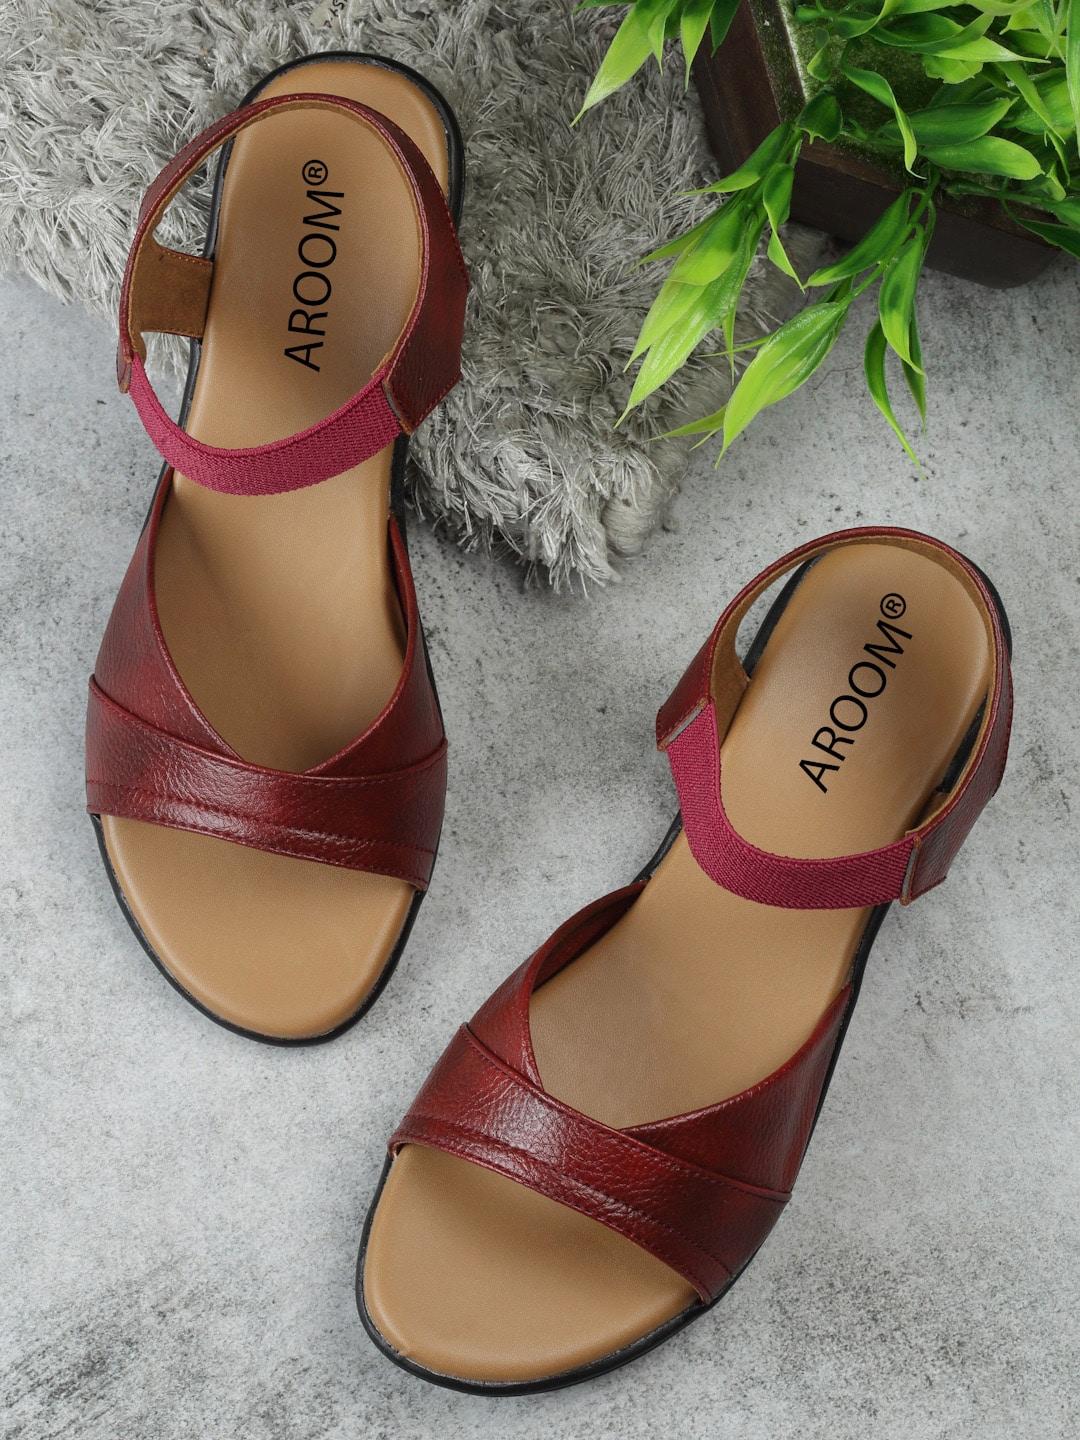 aroom-women-leather-open-toe-flats-with-backstrap